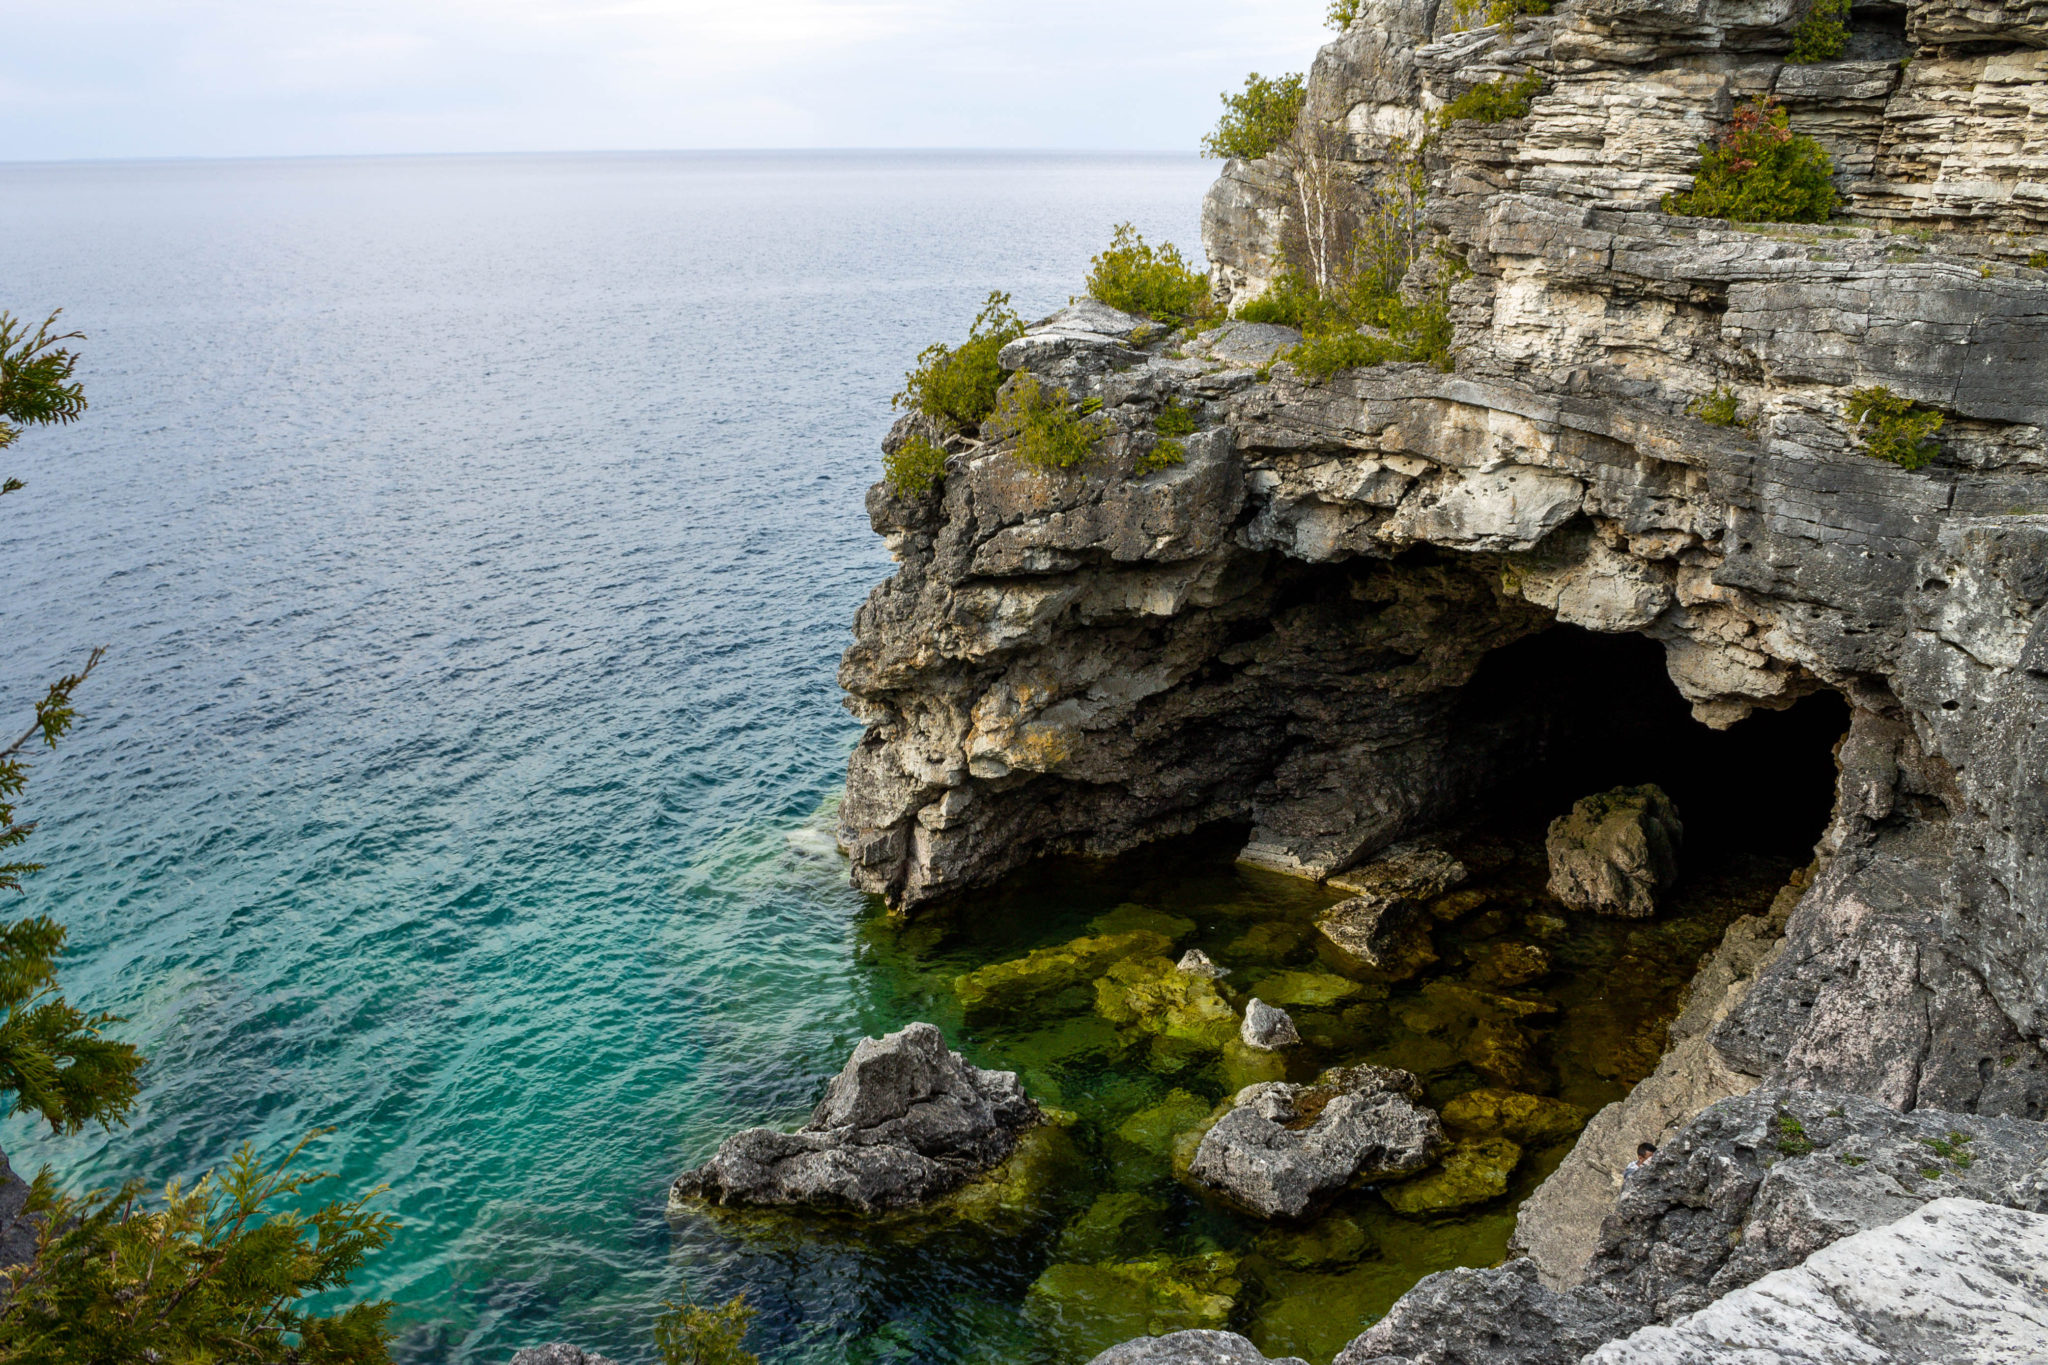 The grotto at Bruce Peninsula National Park near Tobermory, Ontario, Canada. This is one of the most scenic shores in Ontario and is located on Georgian Bay, part of Lake Huron.